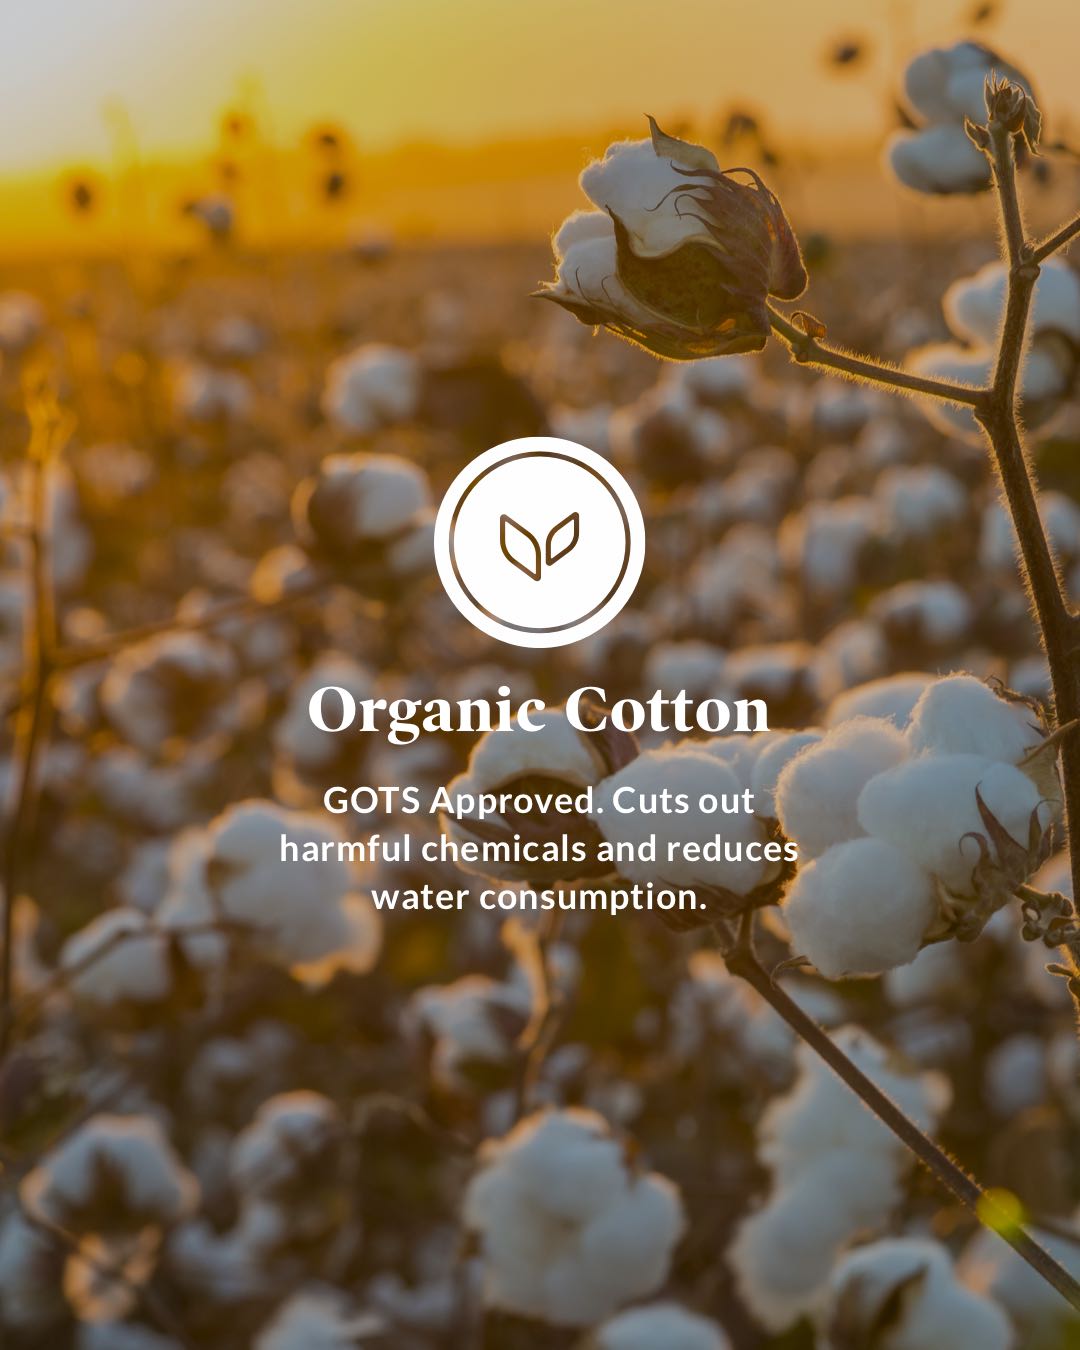 Organic Cotton - GOTS Approved. Cuts out harmful chemicals and reduces water consumption.
